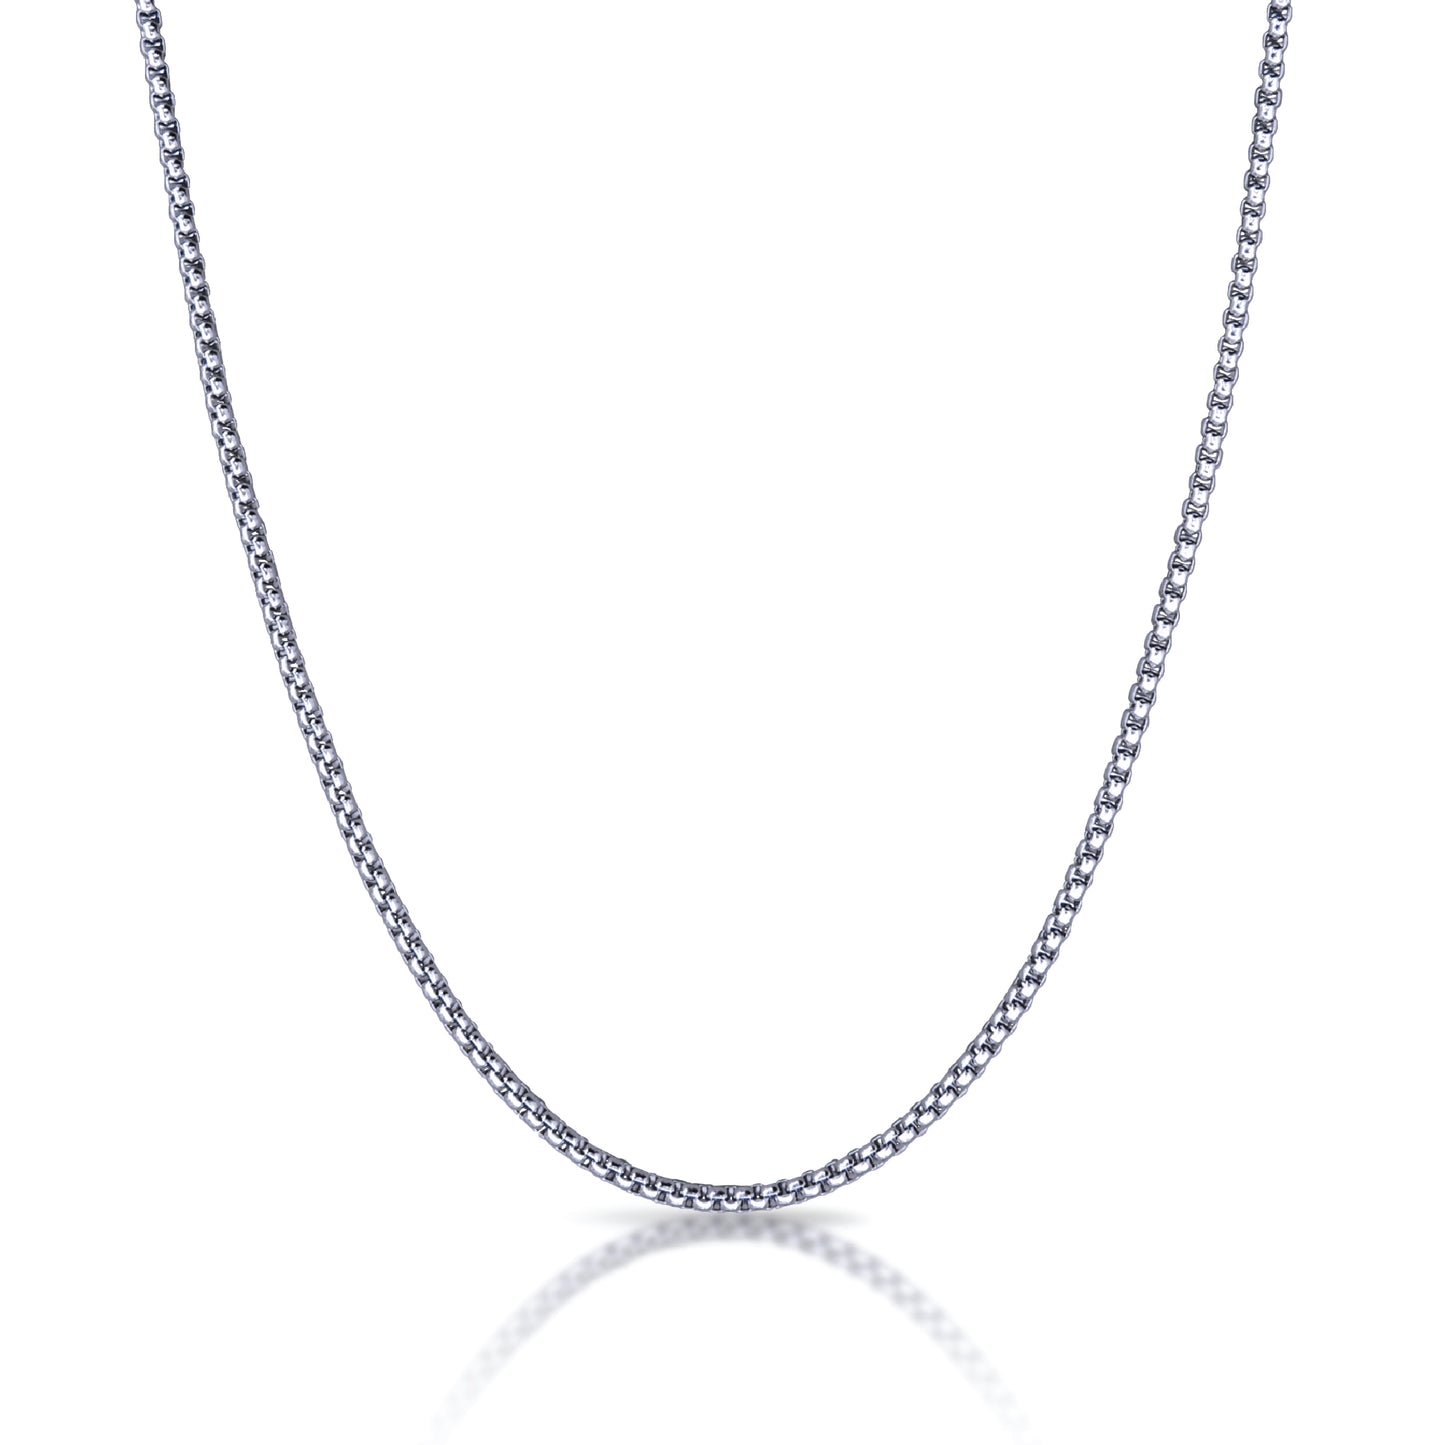 Box Chain Necklace - Stainless Steel